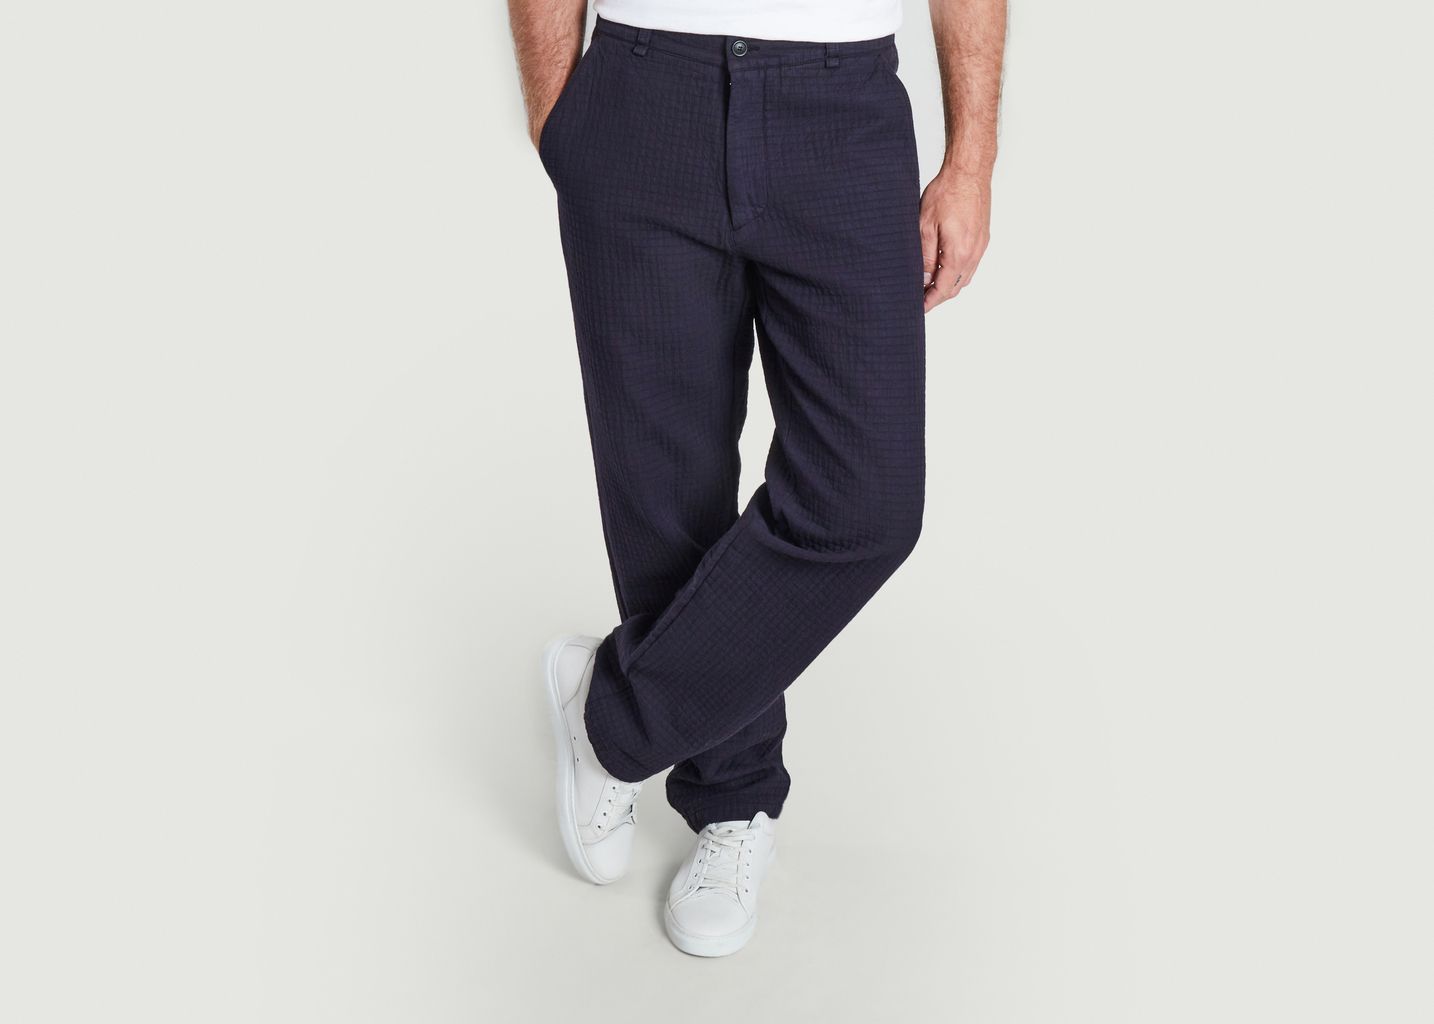 Kyle Sumo trousers - Homecore